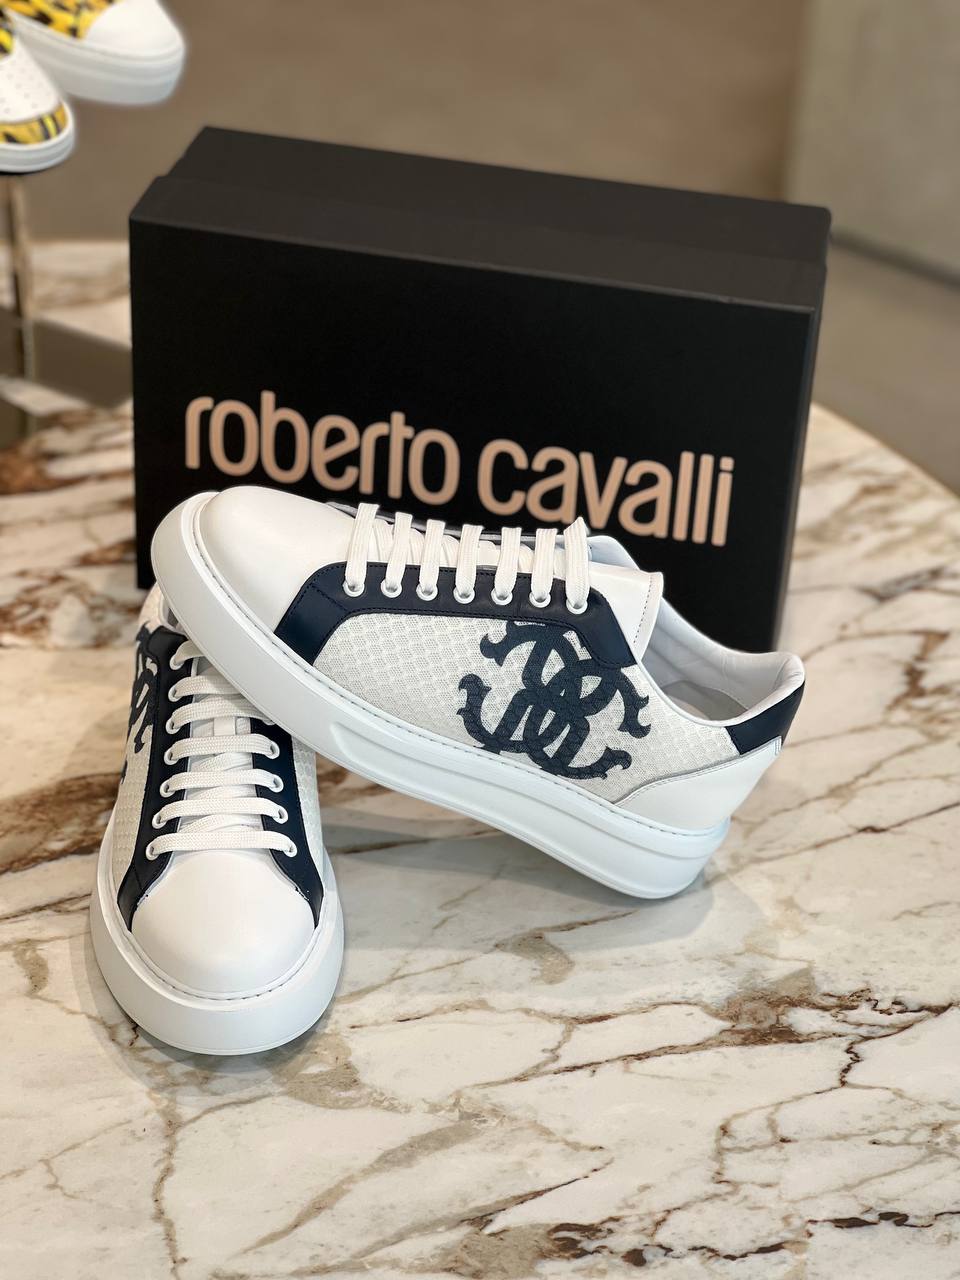 Roberto Cavalli Outlets 5761